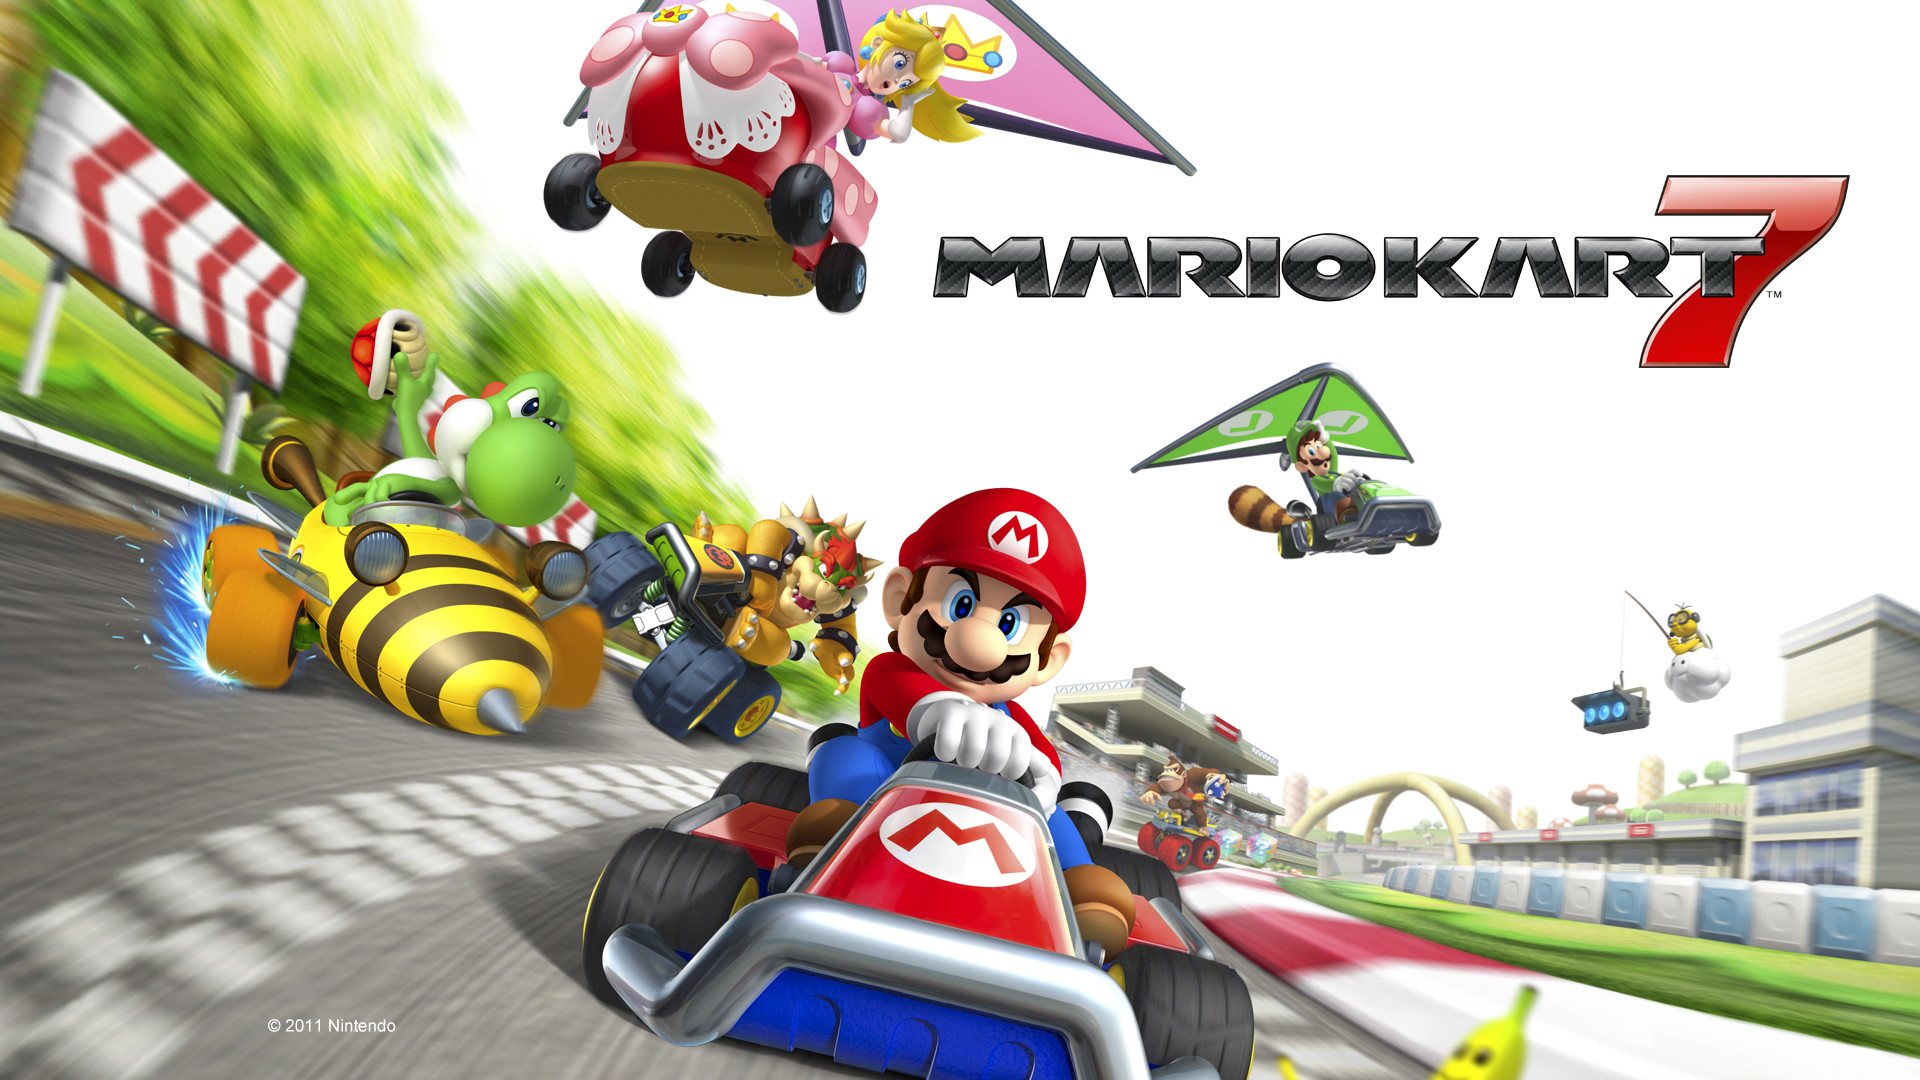 Follow The Rainbow Road Mario Kart 7 Download for 18 from Jelly Deals